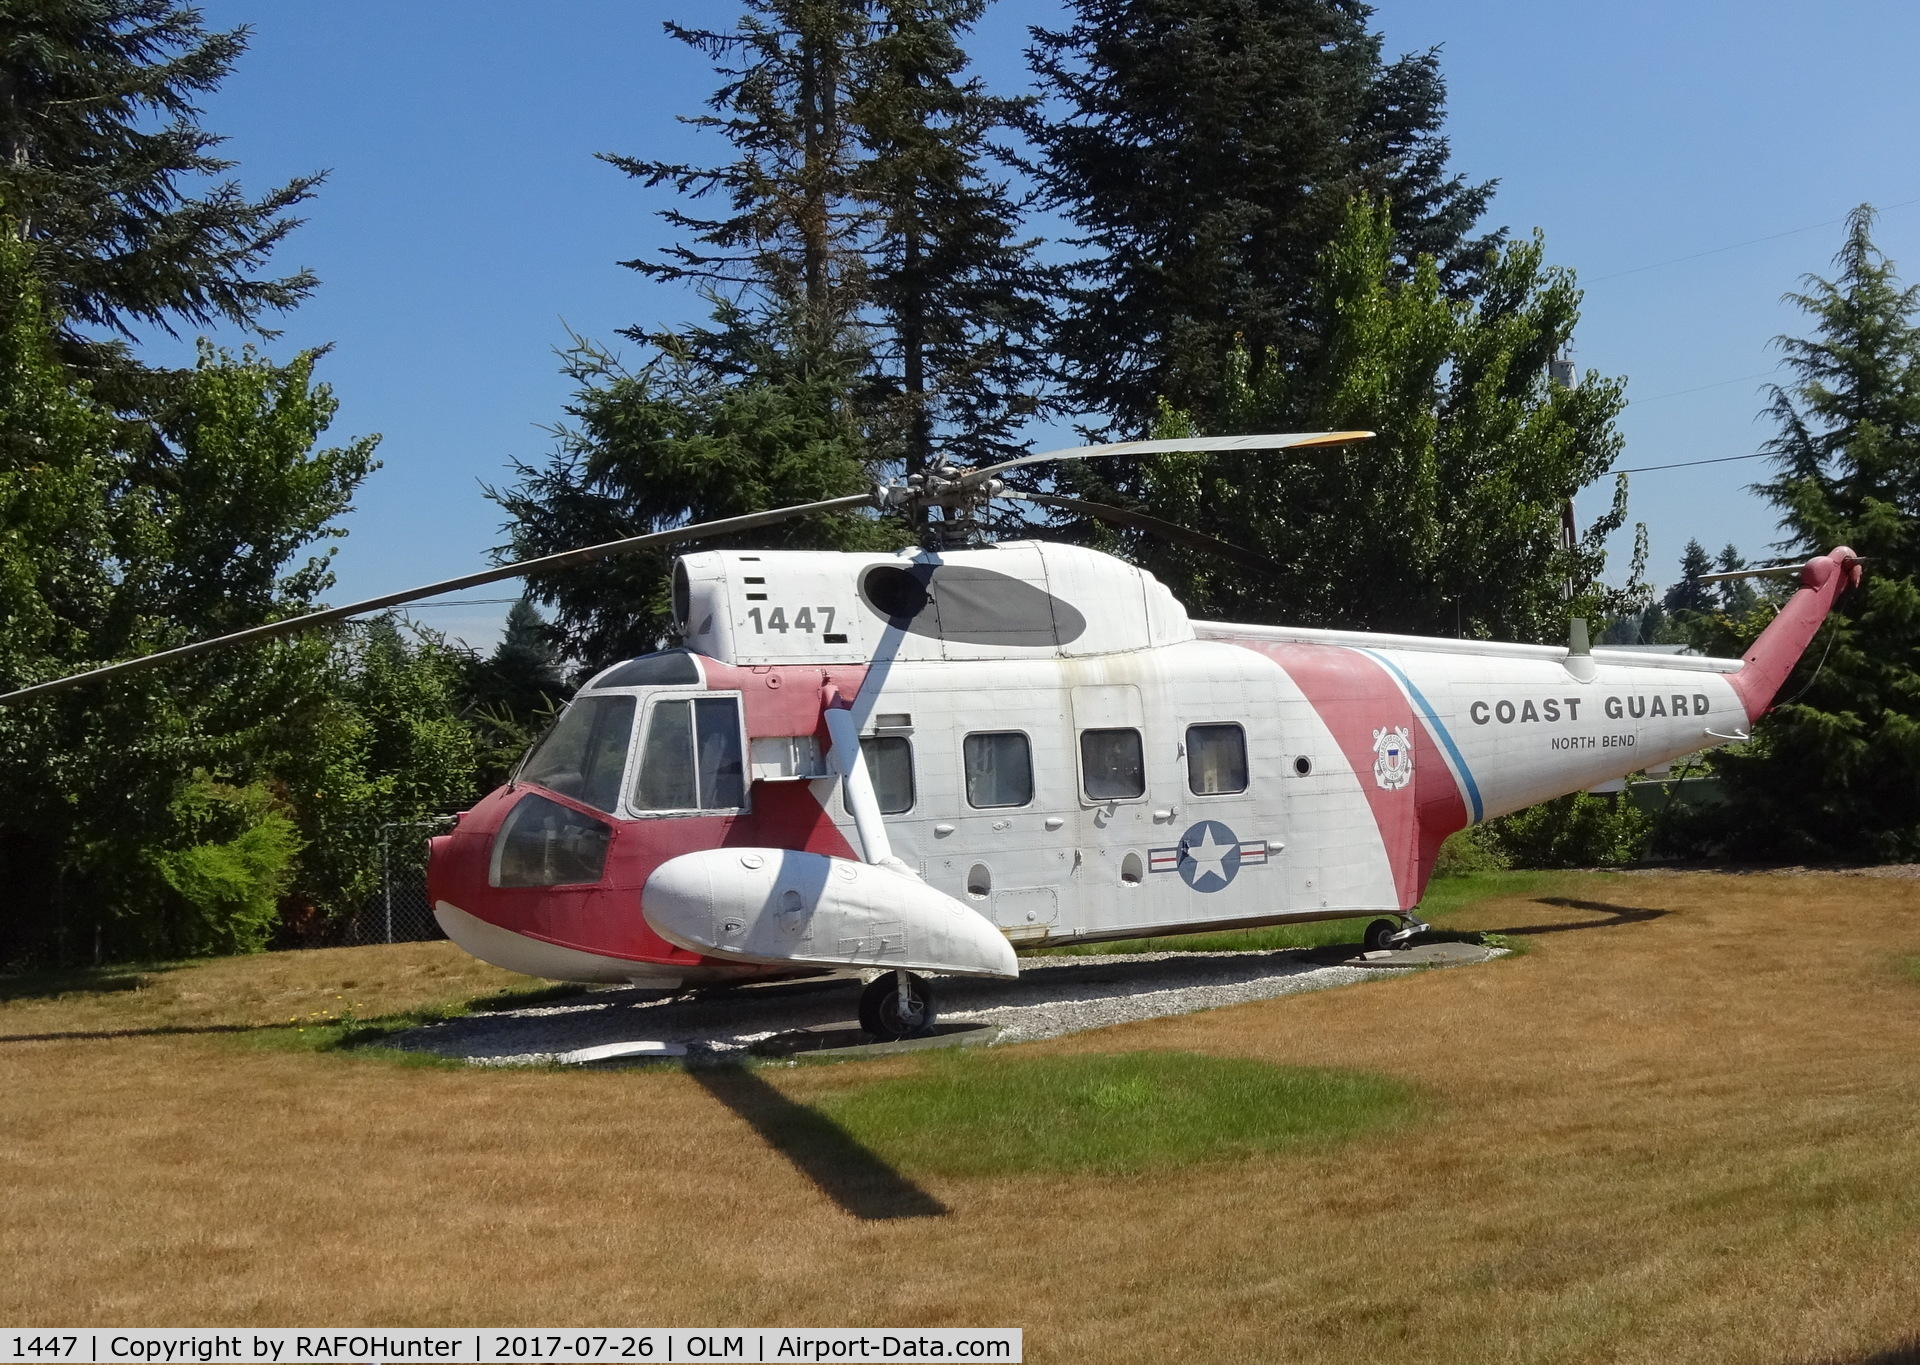 1447, 1968 Sikorsky HH-52A Sea Guard C/N 62.130, Sikorsky HH-52A Seaguard genuinely marked as Coast Guard 1447 North Bend.  MSN: 62130, Code: 46031